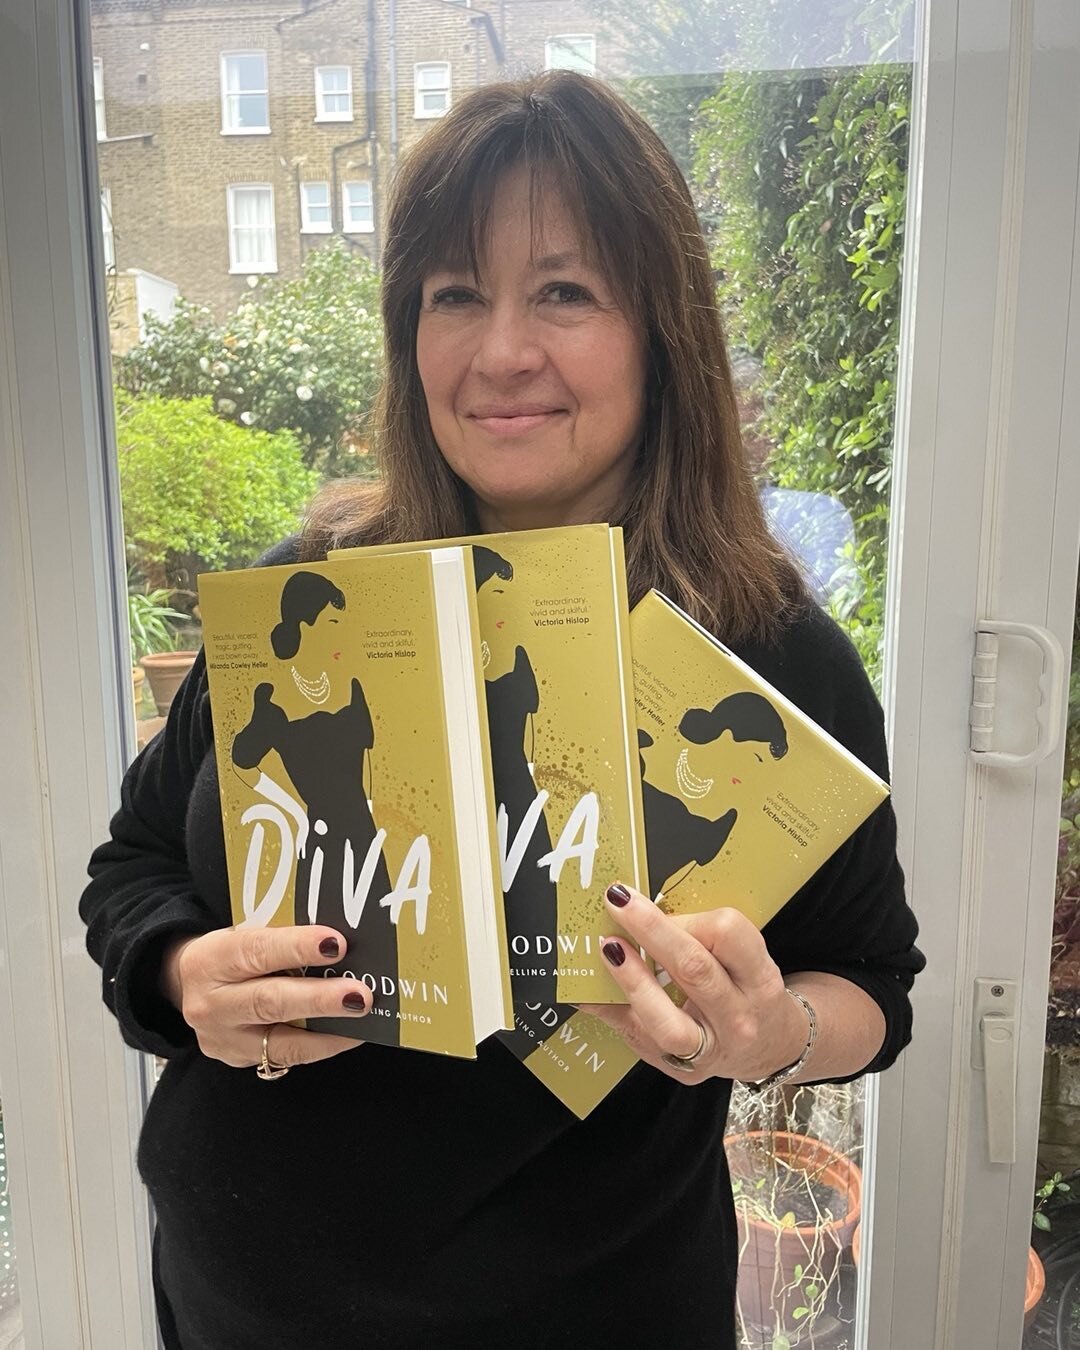 GIVEAWAY - one of these three sparkly copies Diva with a personal inscription - reply tagging the Diva in your life ( in the sense of life enhancing goddess ) by 14th March and one of these could be yours!!!
#bookgiveaway #divathebook #signedcopy #re